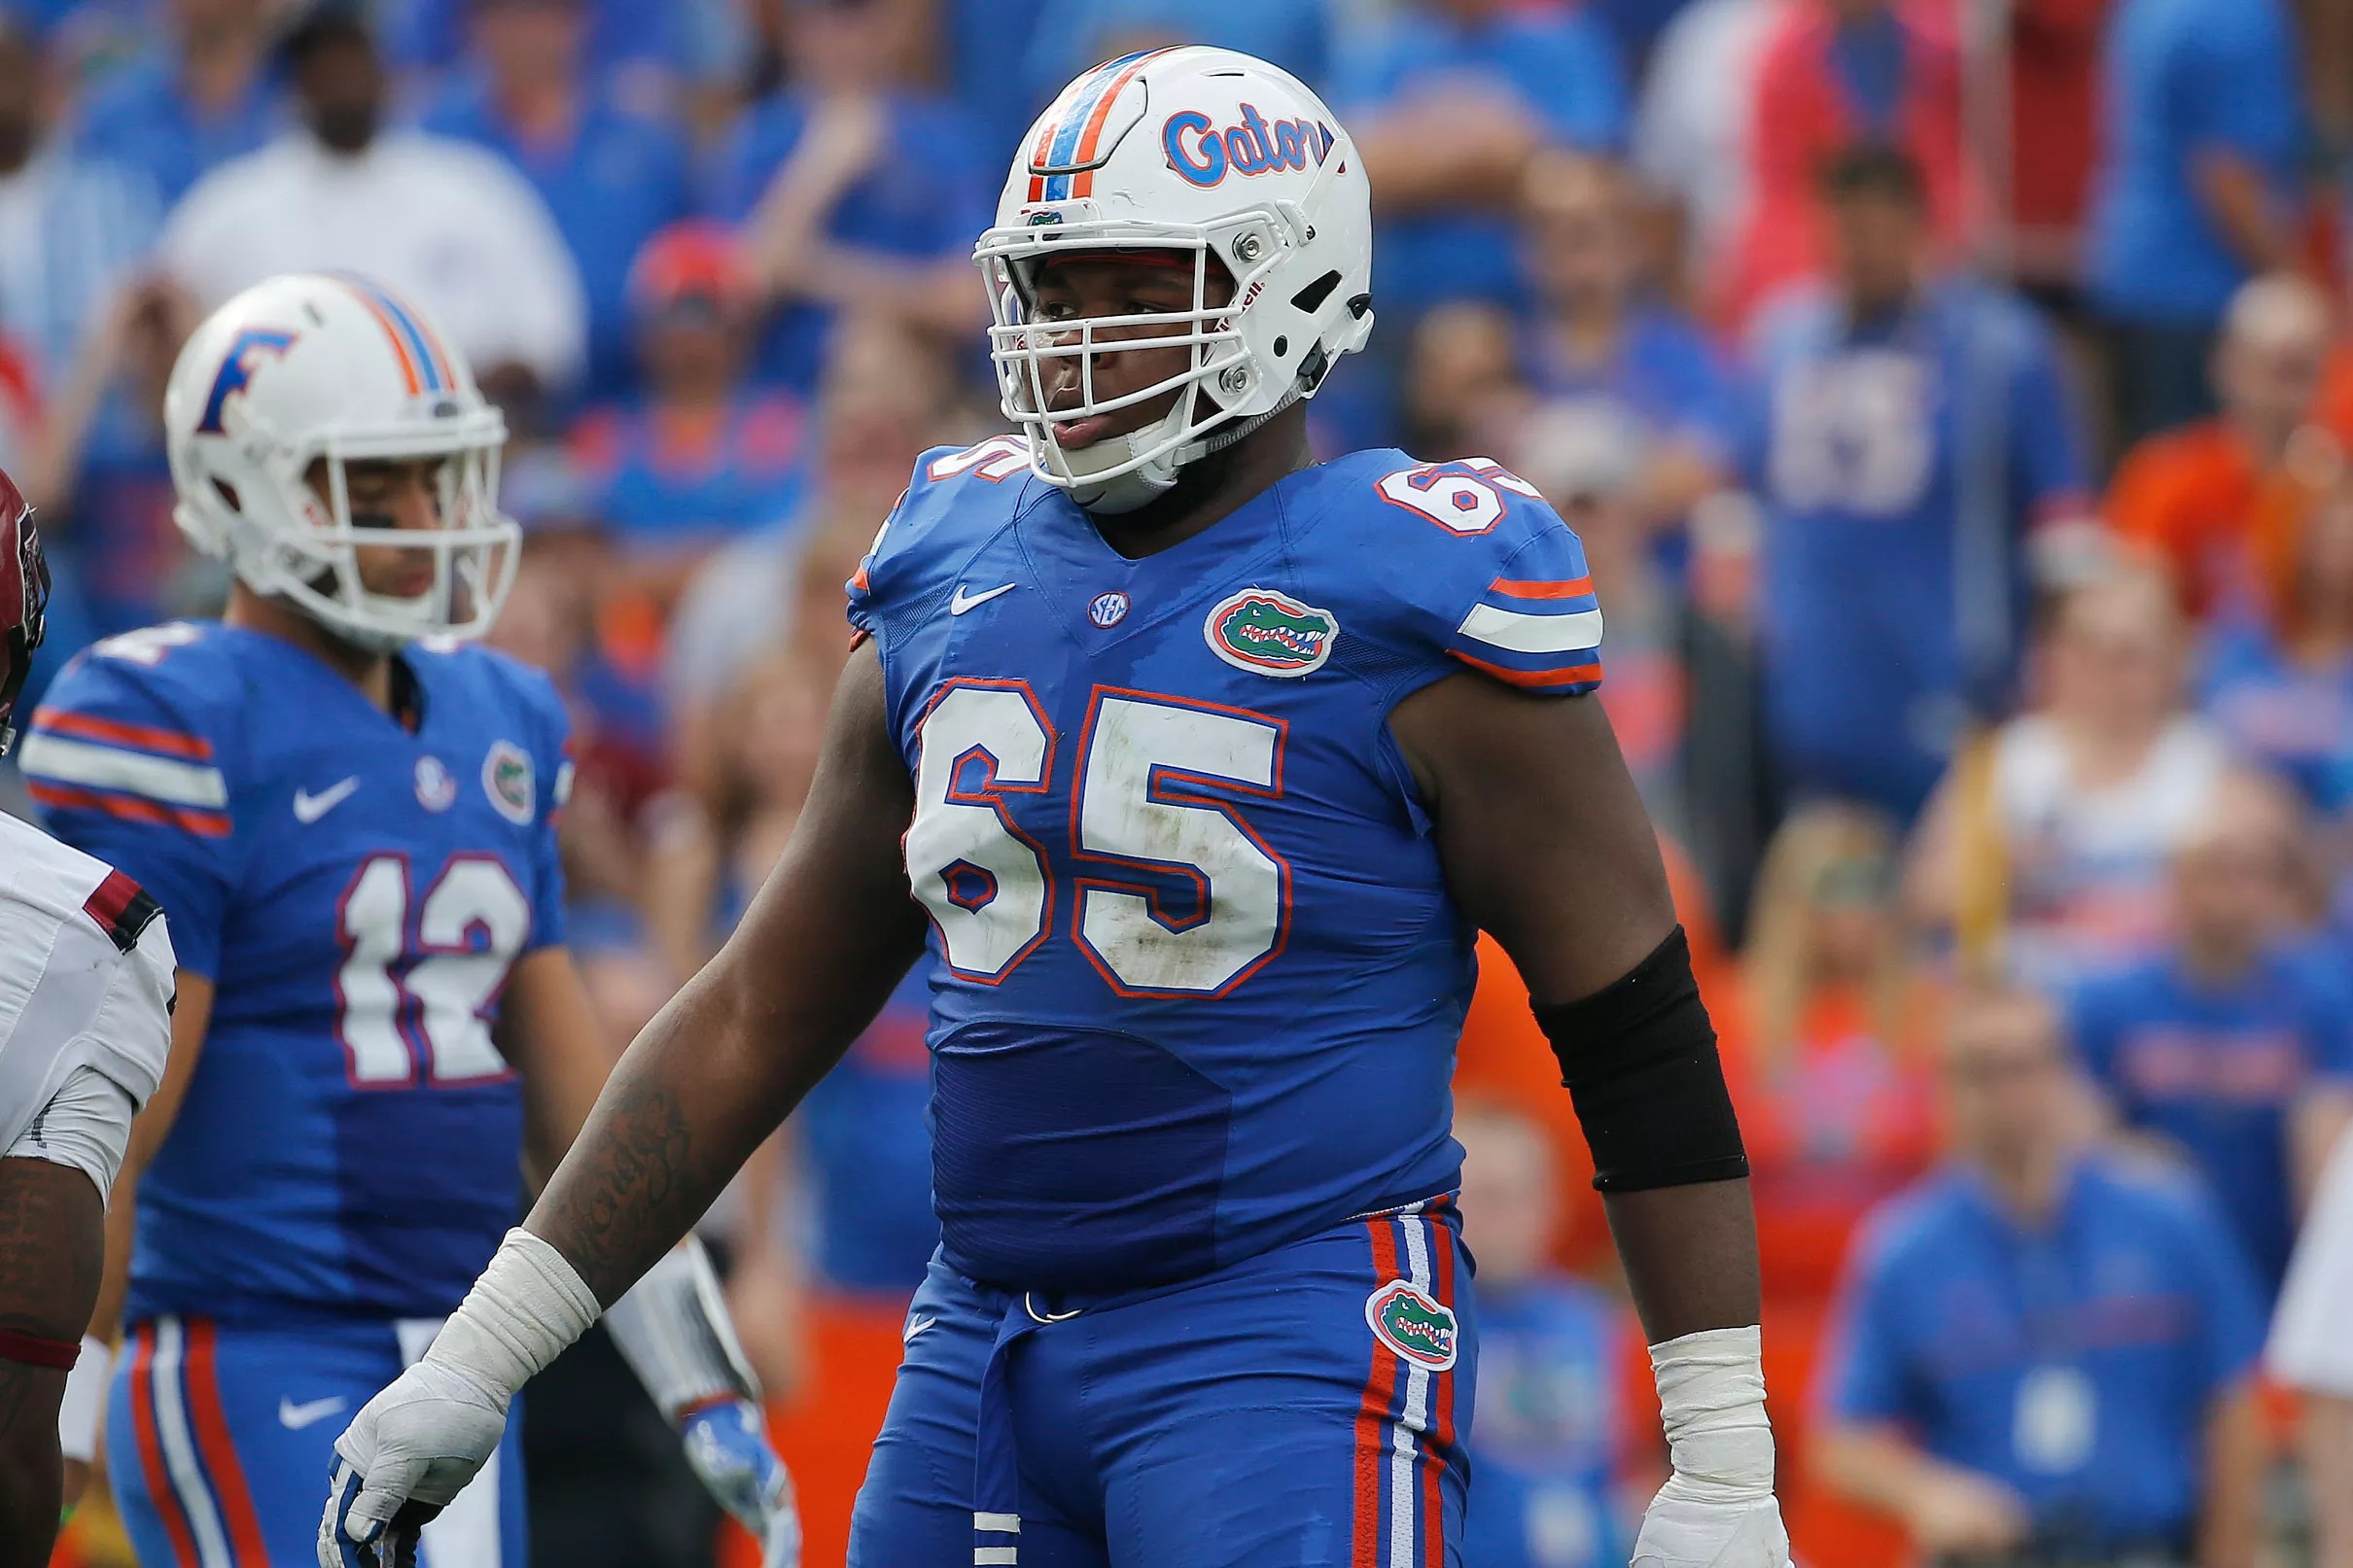 2019 NFL Draft: Florida’s Jawaan Taylor selected by Jacksonville Jaguars in second round